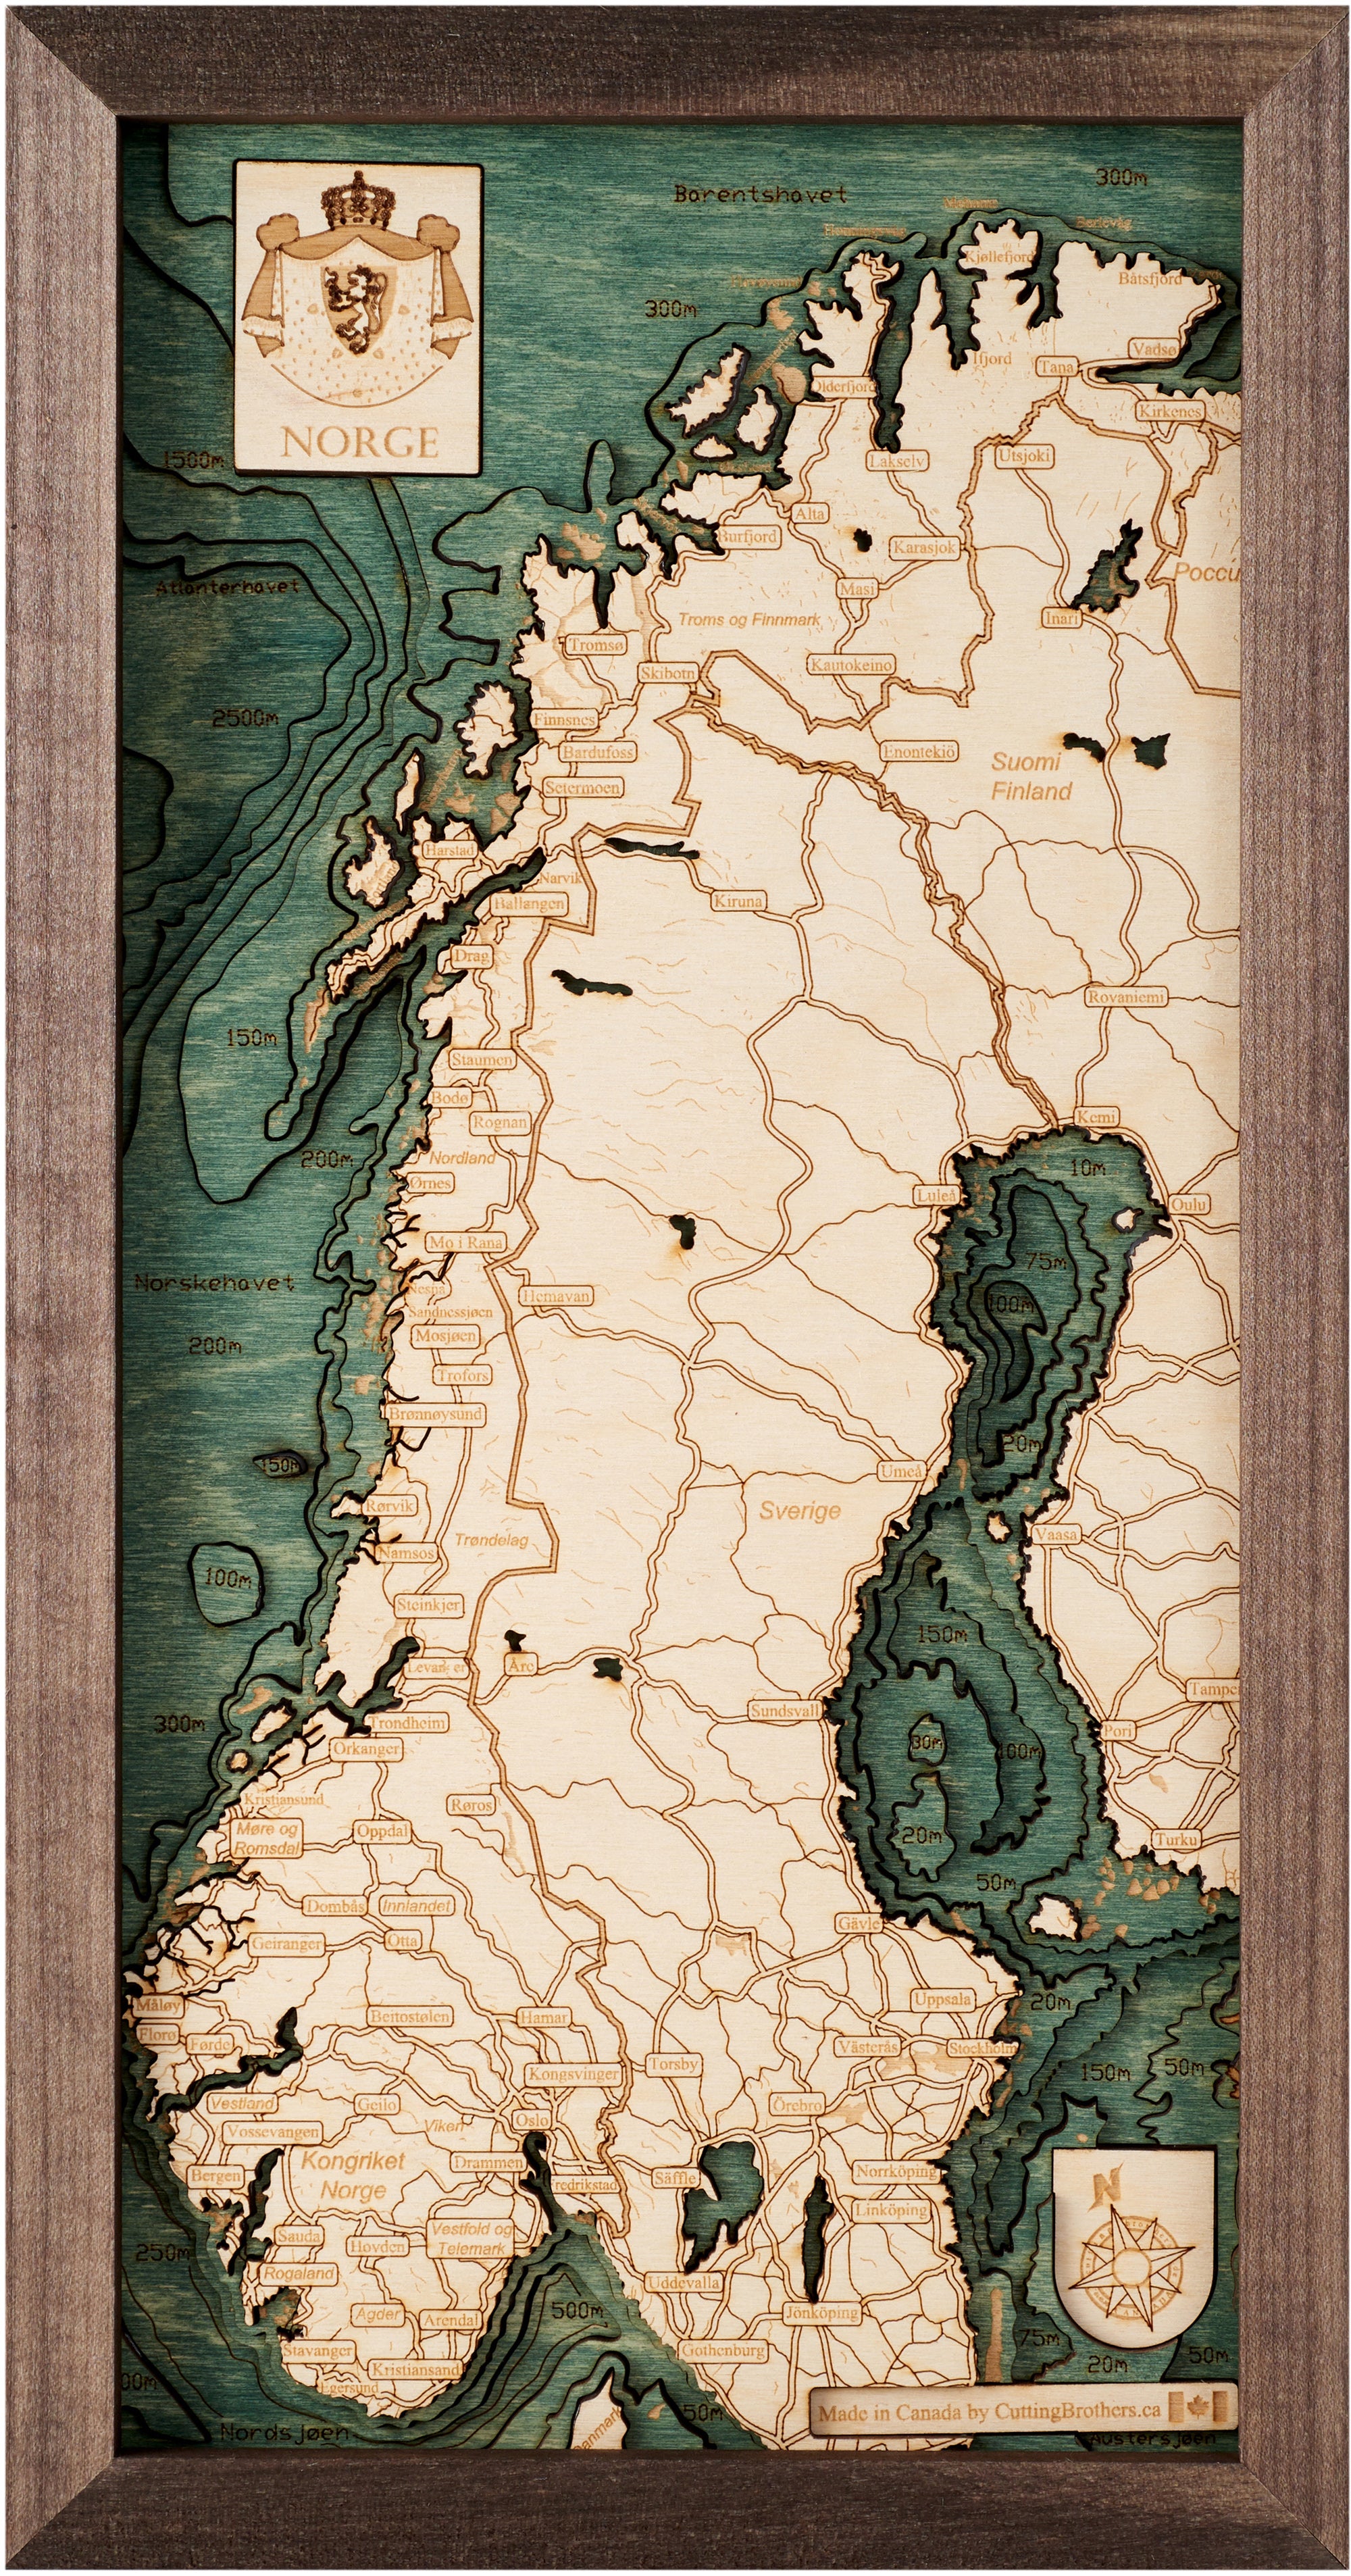 NORWAY 3D Wooden Wall Map - Version S 